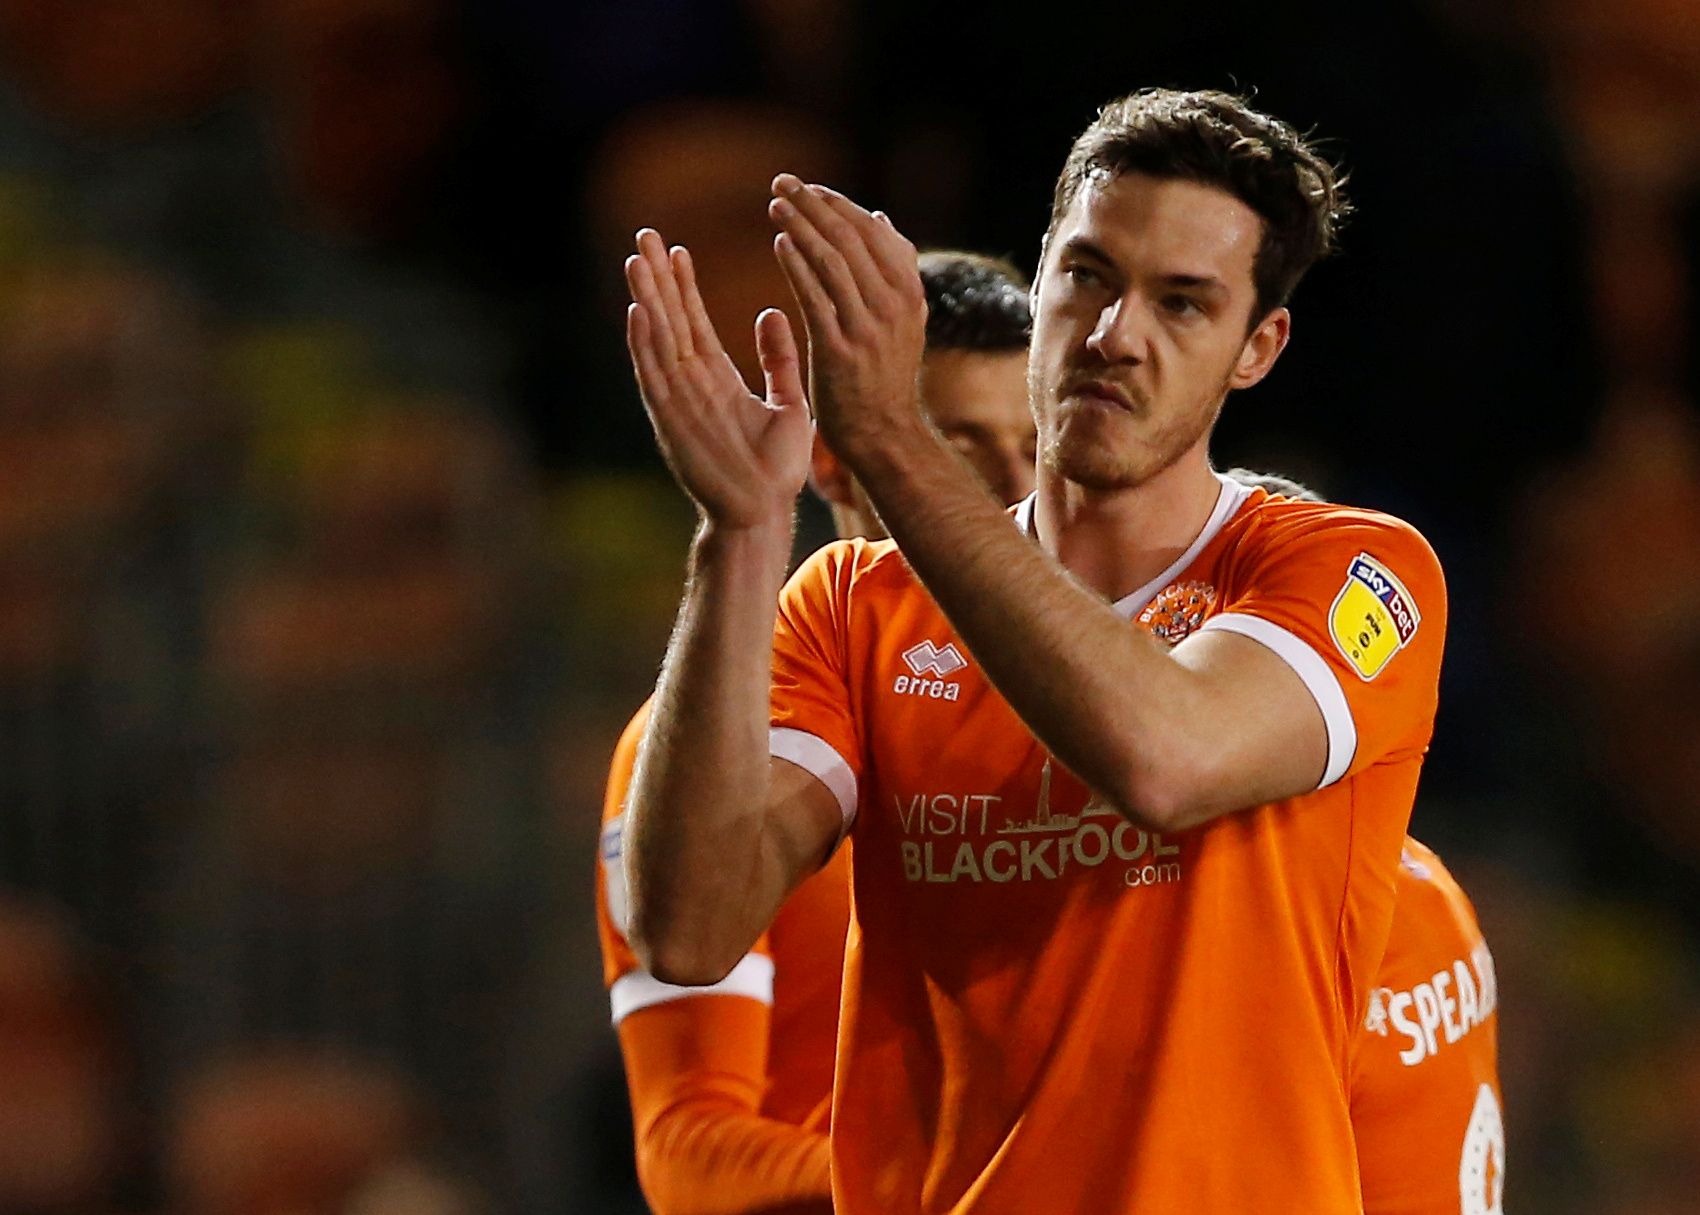 Soccer Football - League One - Blackpool v AFC Wimbledon - Bloomfield Road, Blackpool, Britain - November 16, 2019   Blackpool's Ben Heneghan applauds the fans after the match   Action Images/Craig Brough    EDITORIAL USE ONLY. No use with unauthorized audio, video, data, fixture lists, club/league logos or 